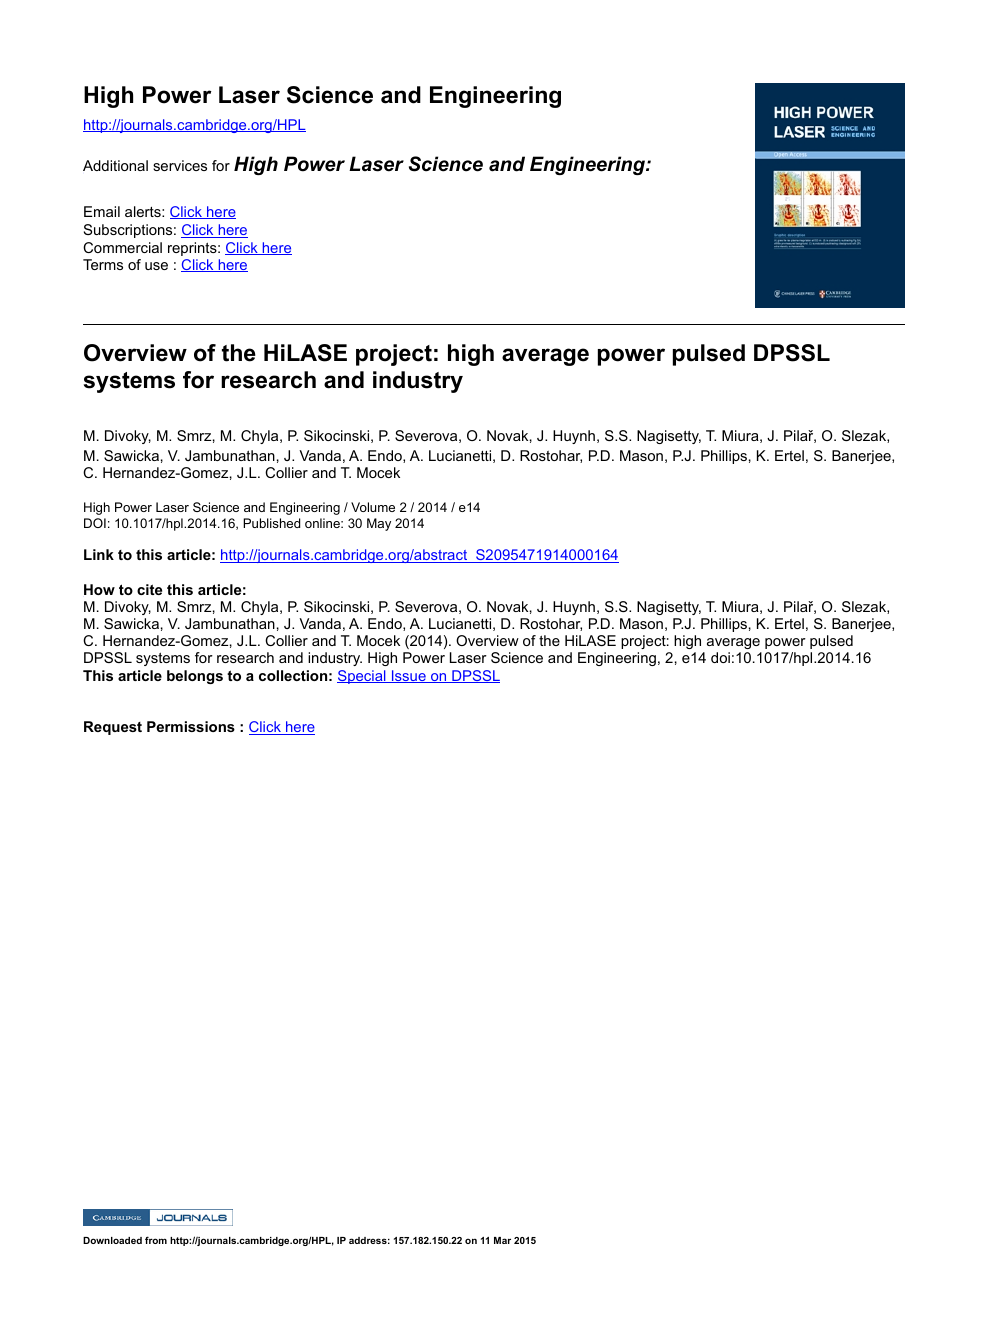 Overview Of The Hilase Project High Average Power Pulsed Dpssl Systems For Research And Industry Topic Of Research Paper In Nano Technology Download Scholarly Article Pdf And Read For Free On Cyberleninka